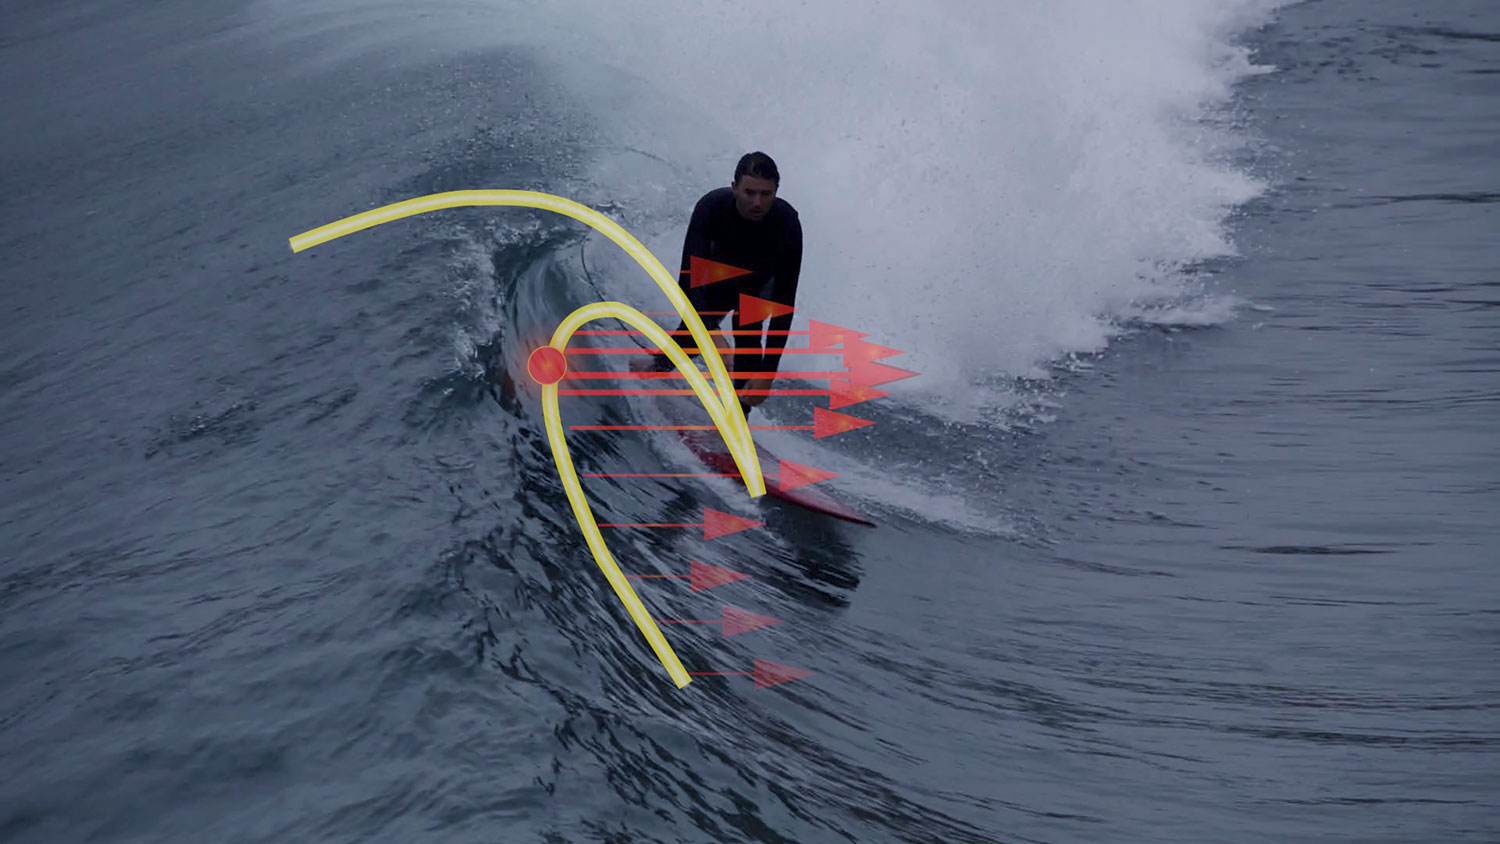 Image of Scripps physical Oceanographer Nick Pizzo surfing